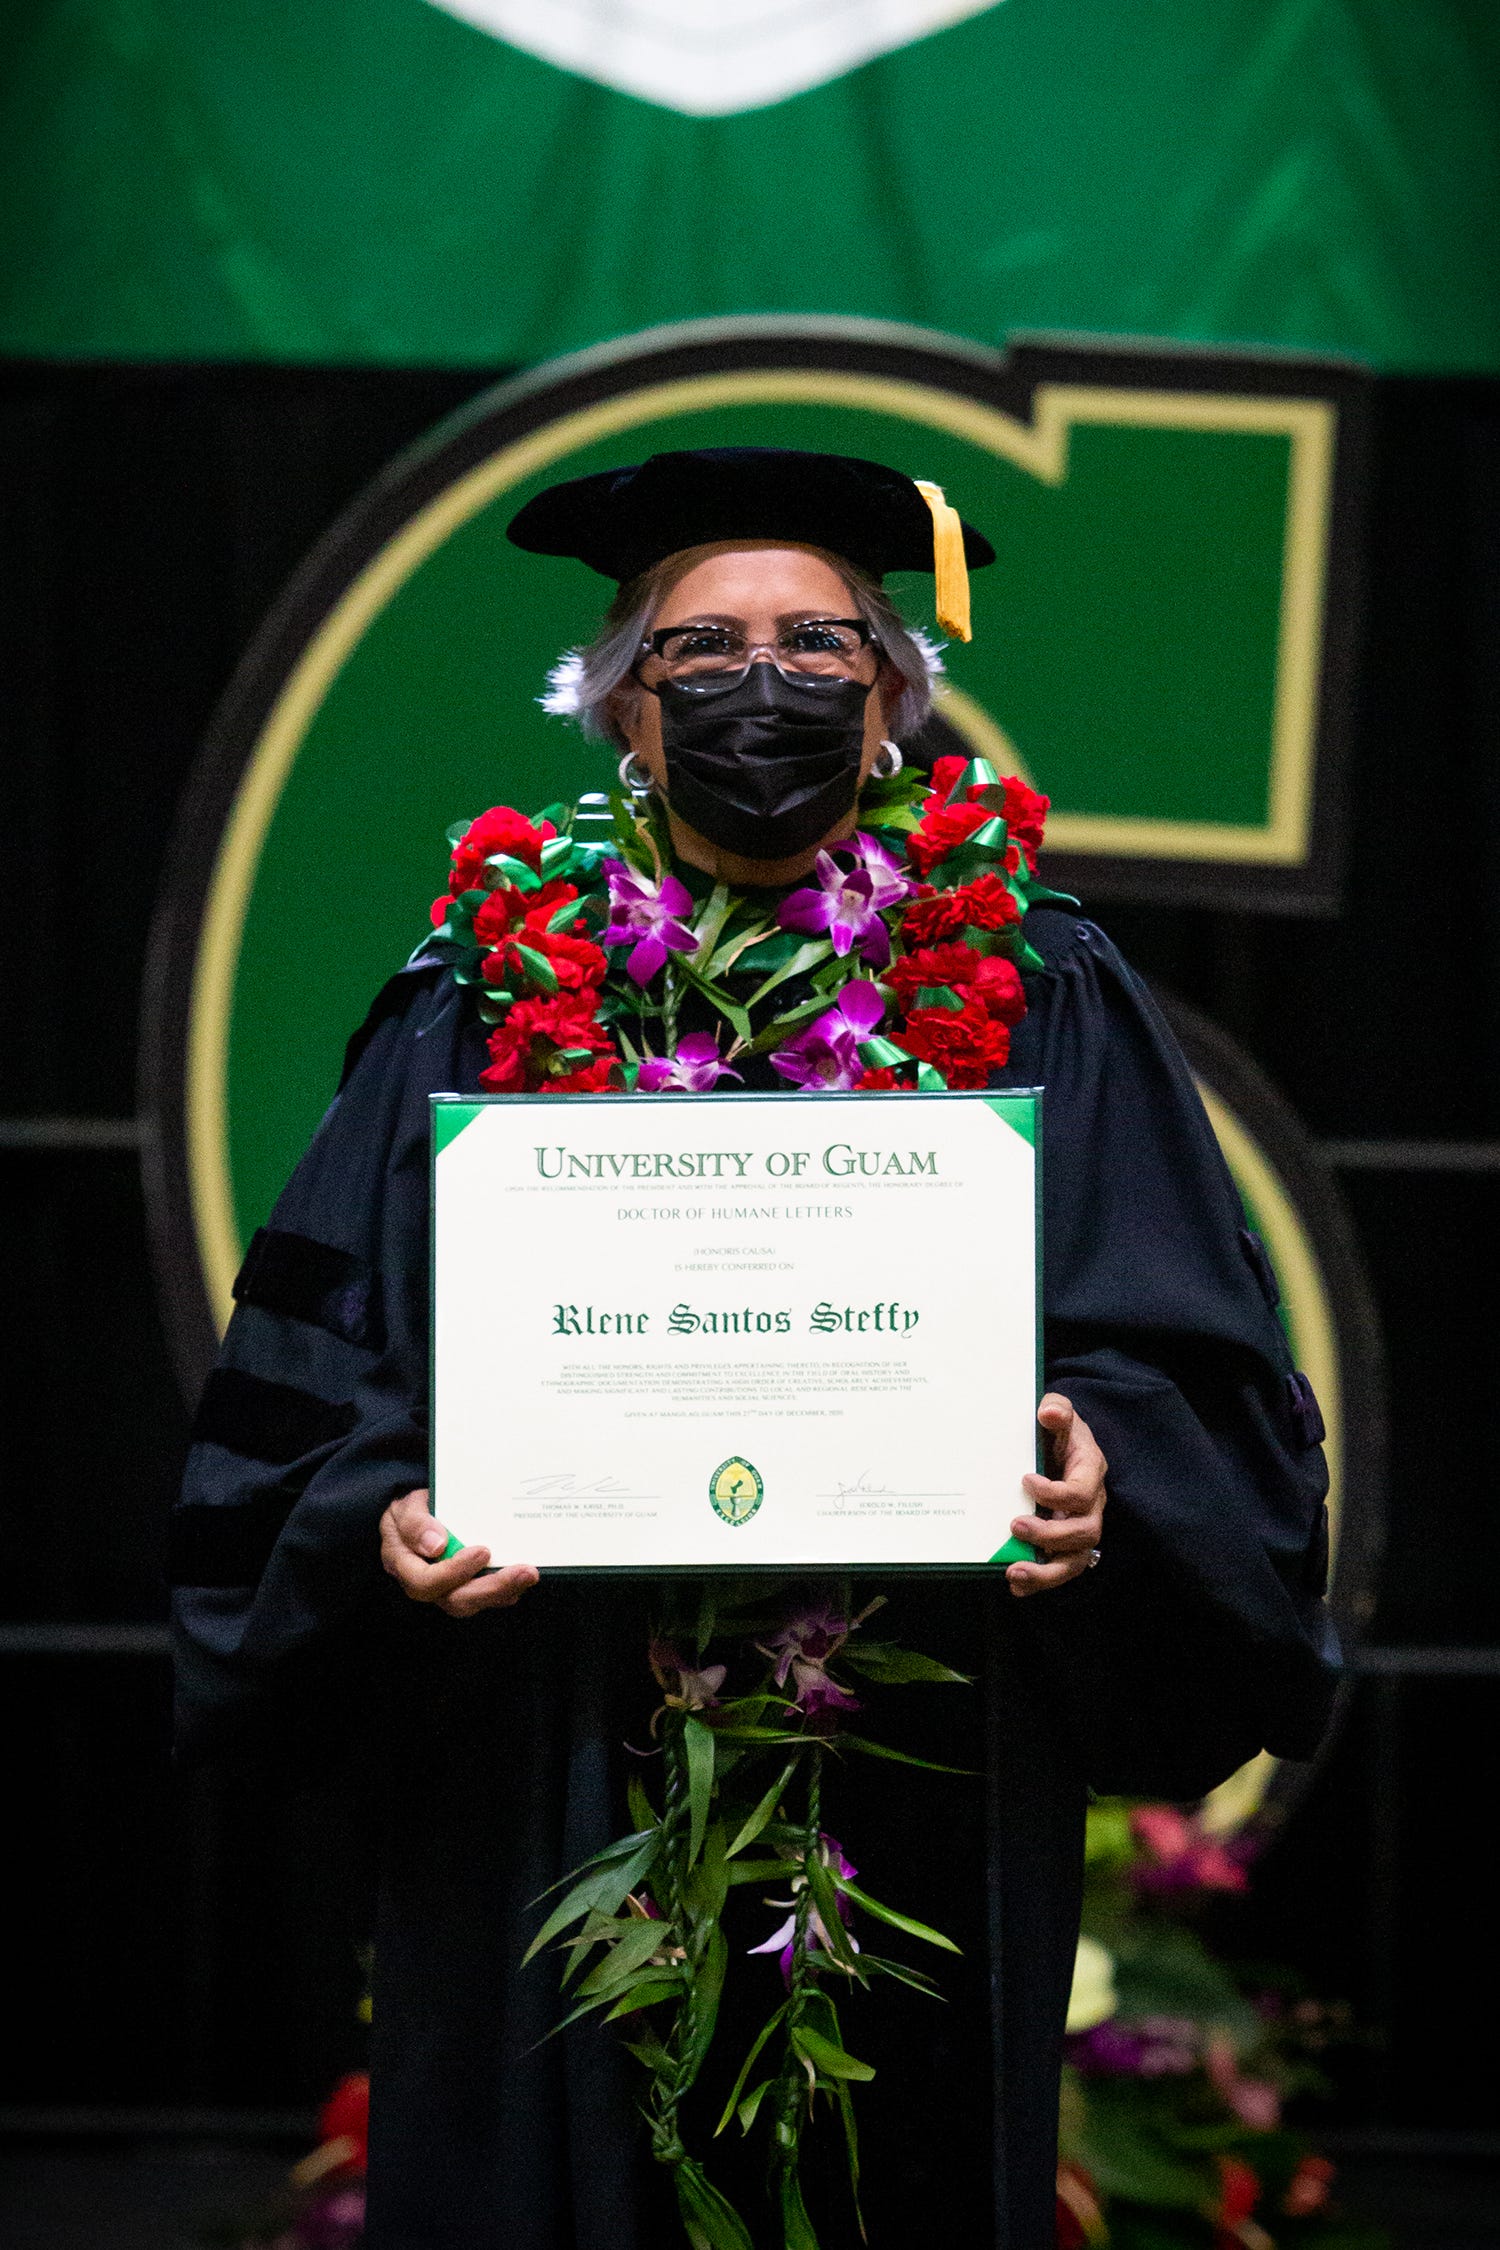 Rlene S. Steffy, one of the leading oral history practitioners in the region, received an honorary Doctor of Humane Letters degree from the University of Guam Board of Regents during the commencement ceremony in December 2020.